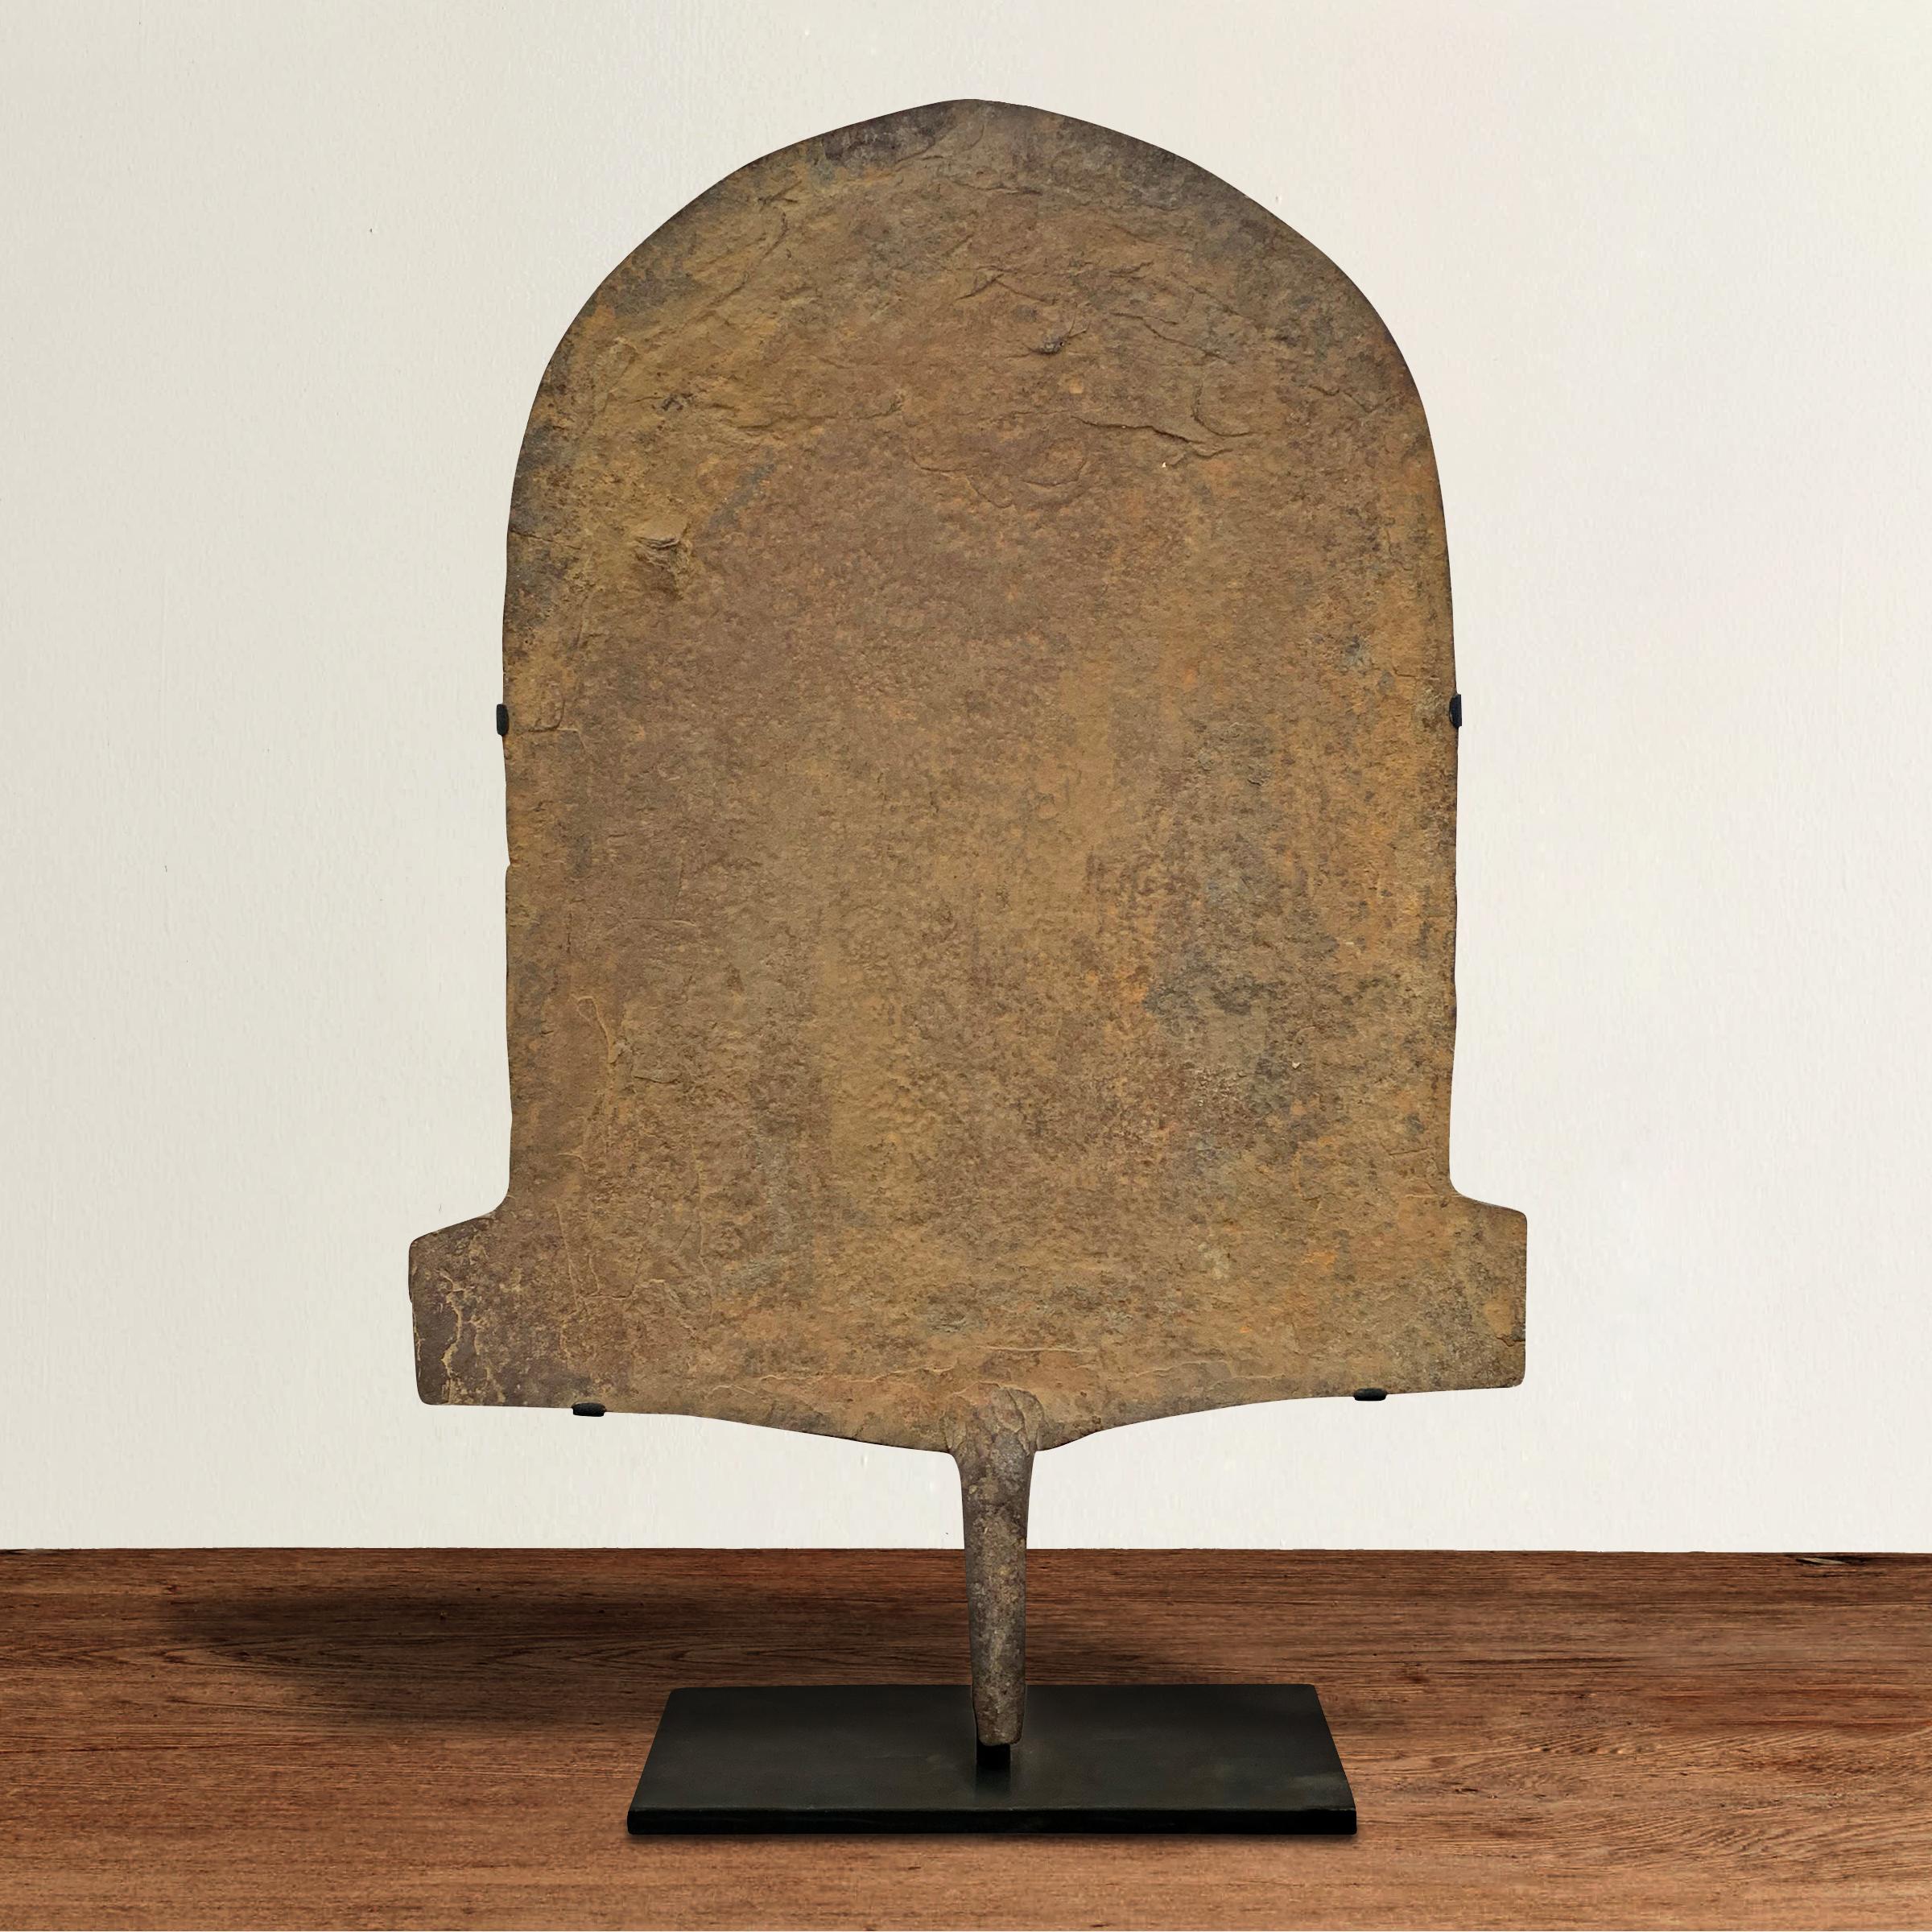 A fantastic 19th century Afo culture wrought iron spade currency piece mounted on custom steel stand. Currency pieces like these were used for large purchases including land or livestock. Such a wonderful organic modern shape!